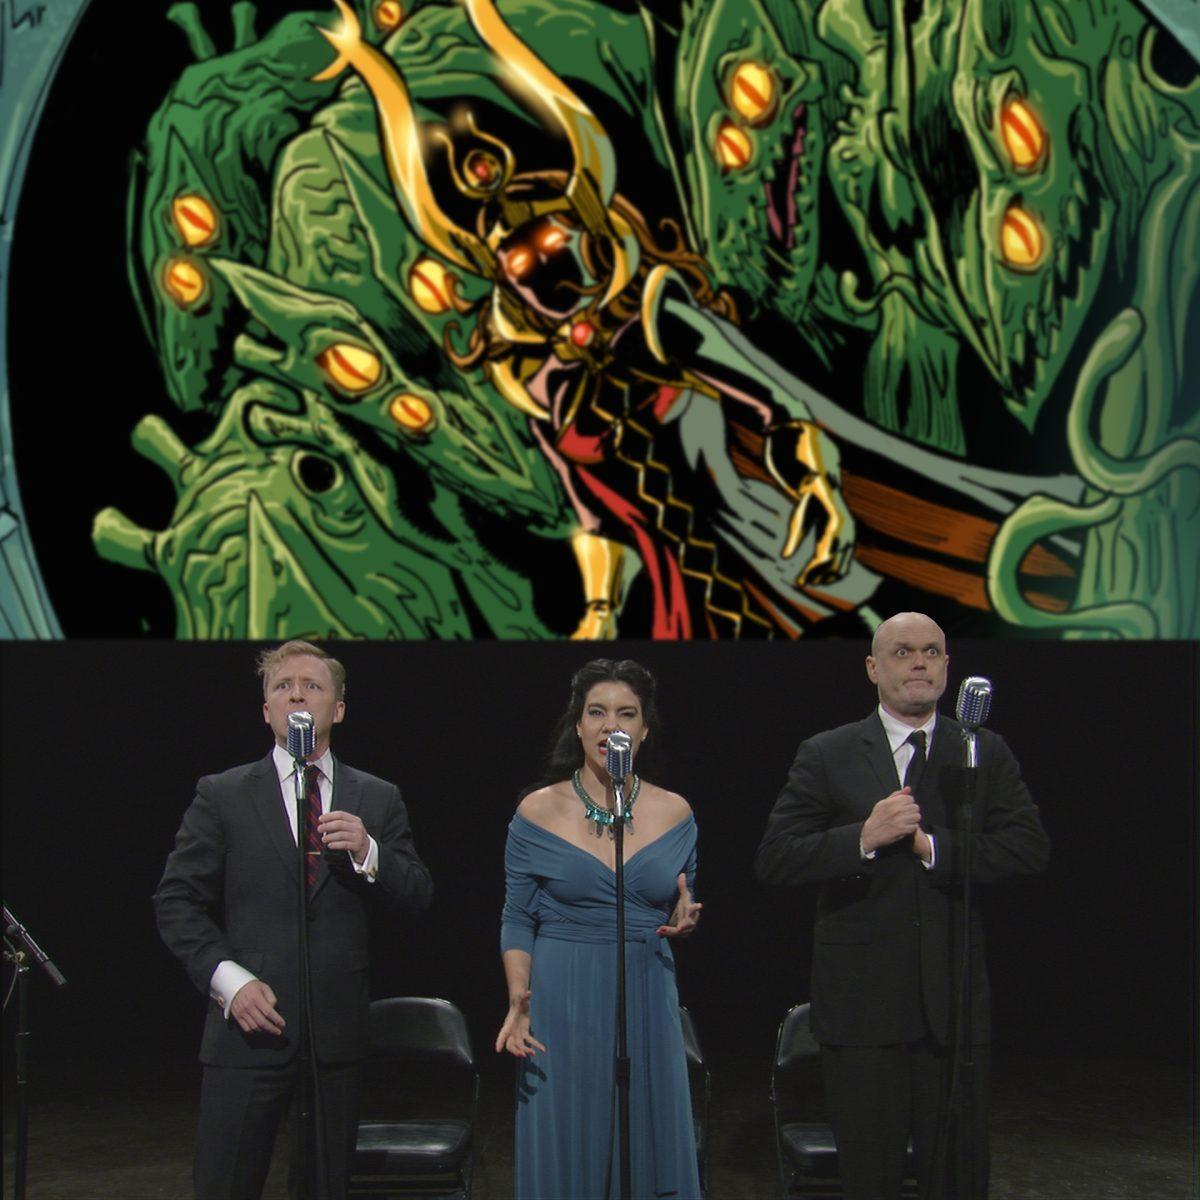 Intergalactic Nemesis combines a graphic novel with music and radio play to create a performance that will be held Thursday in Rudder Auditorium.